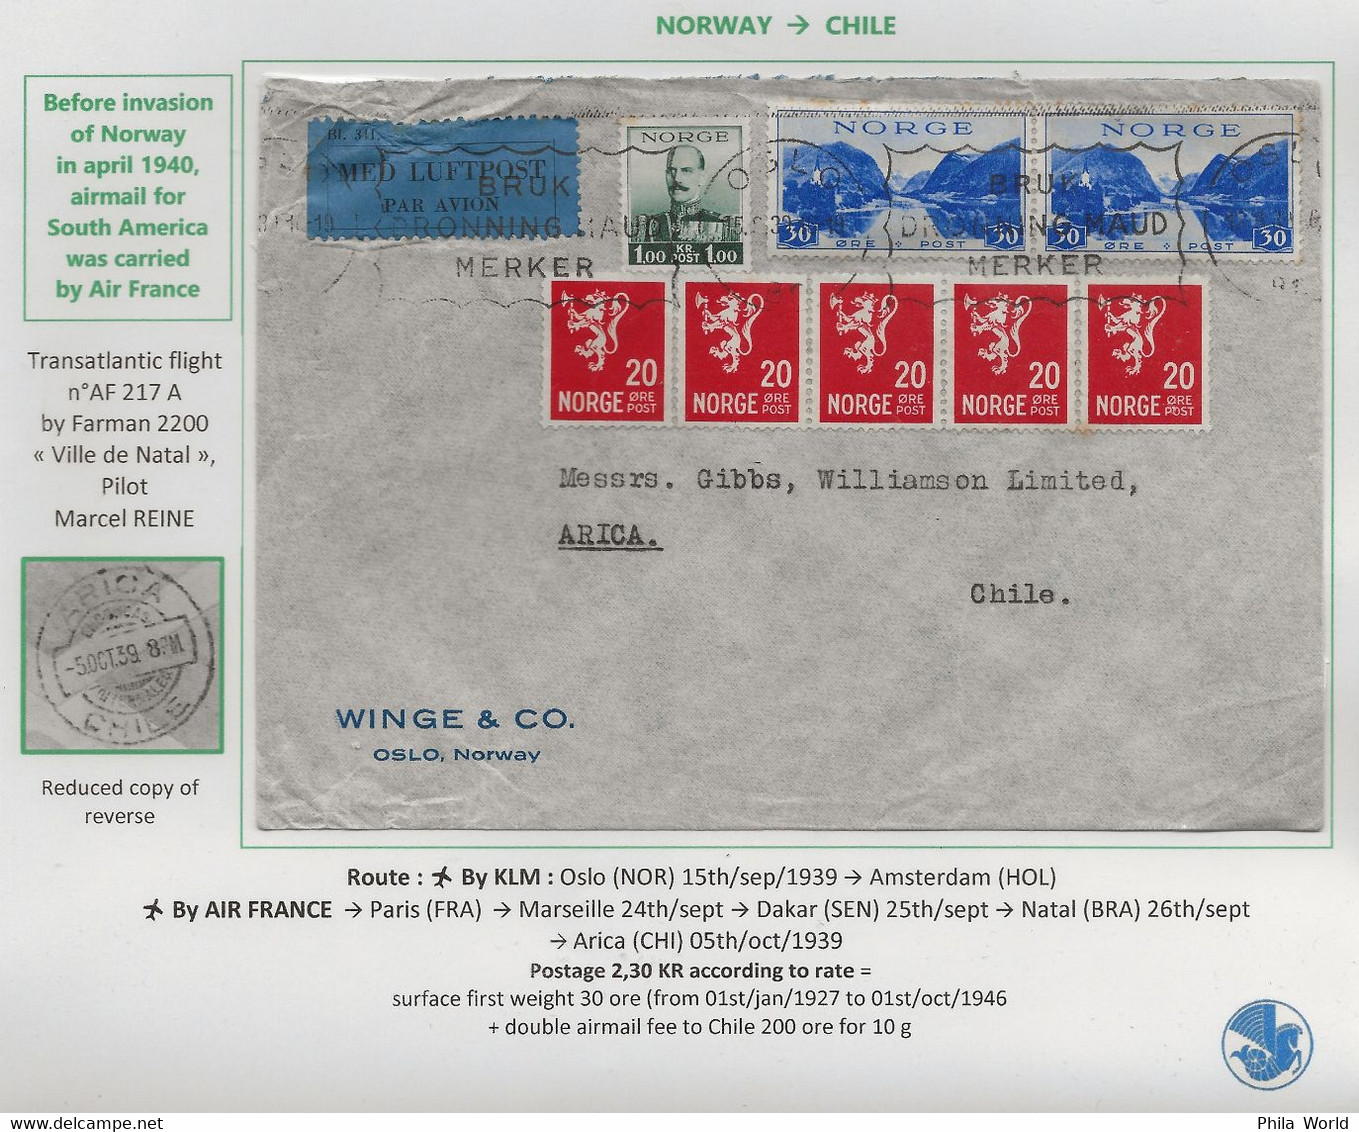 AIR FRANCE 1939 NORWAY Oslo CHILE Arica Air Mail Cover Via KLM Amsterdam AF 217 A Marcel REINE - Storia Postale